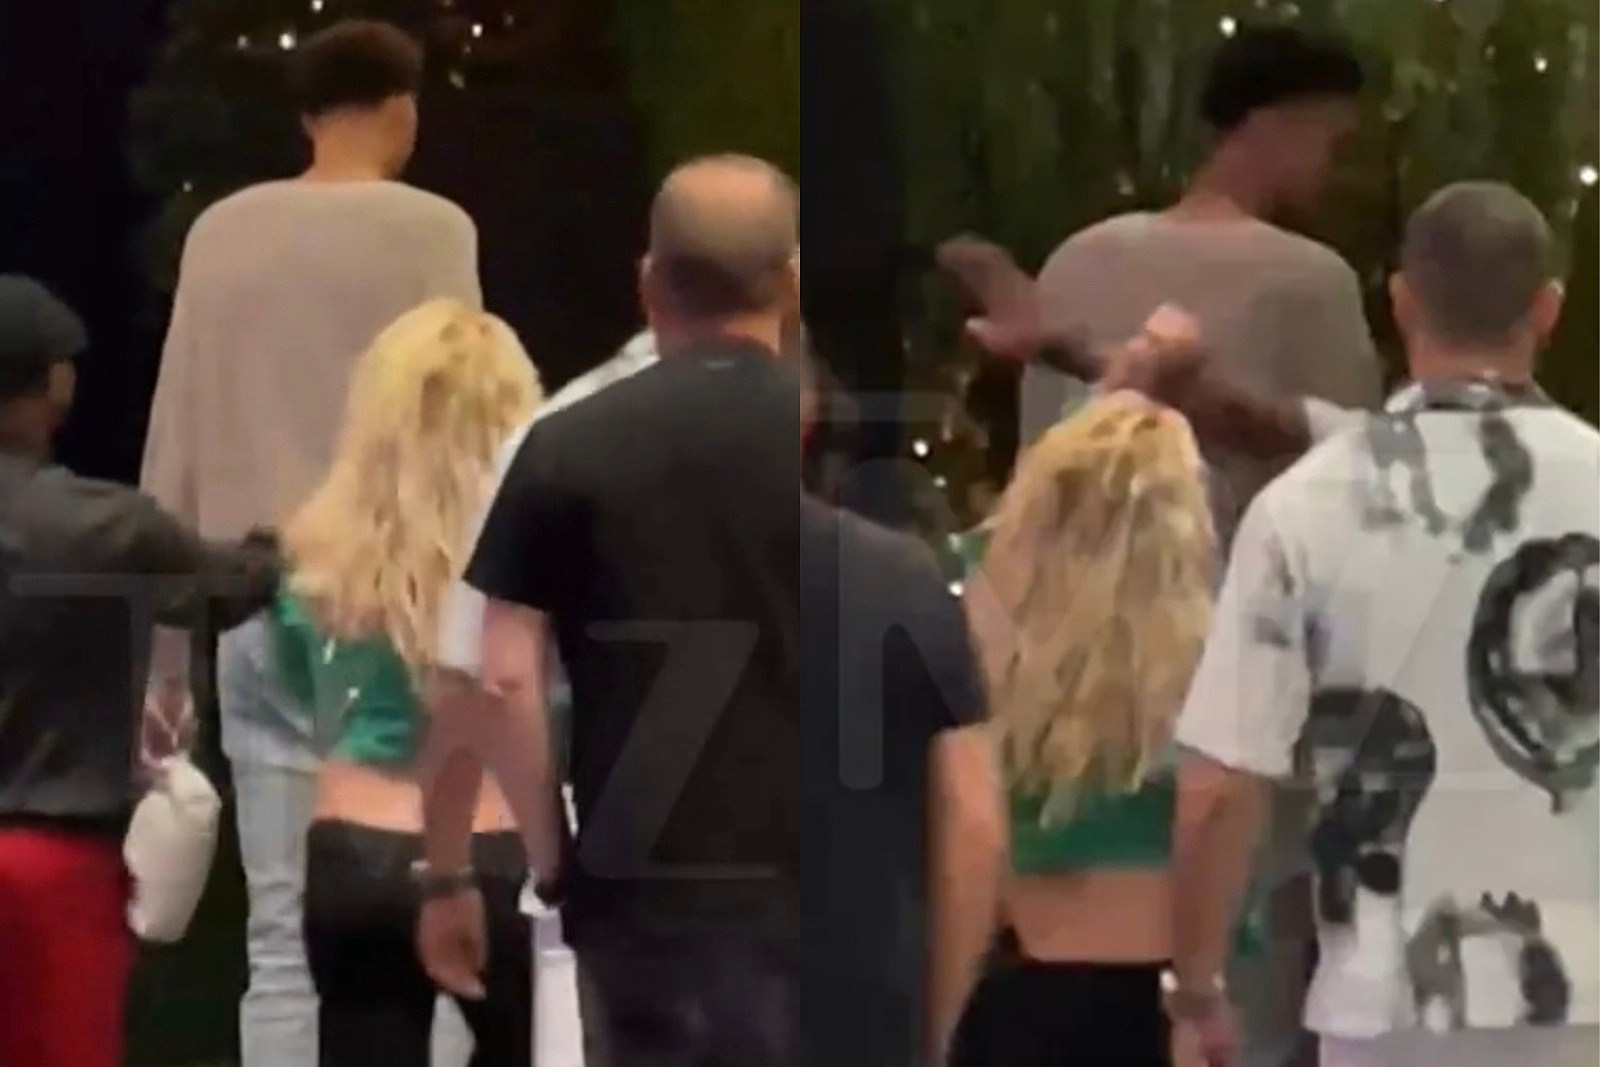 Video Captures Moment Britney Spears Slapped by Wembys Security